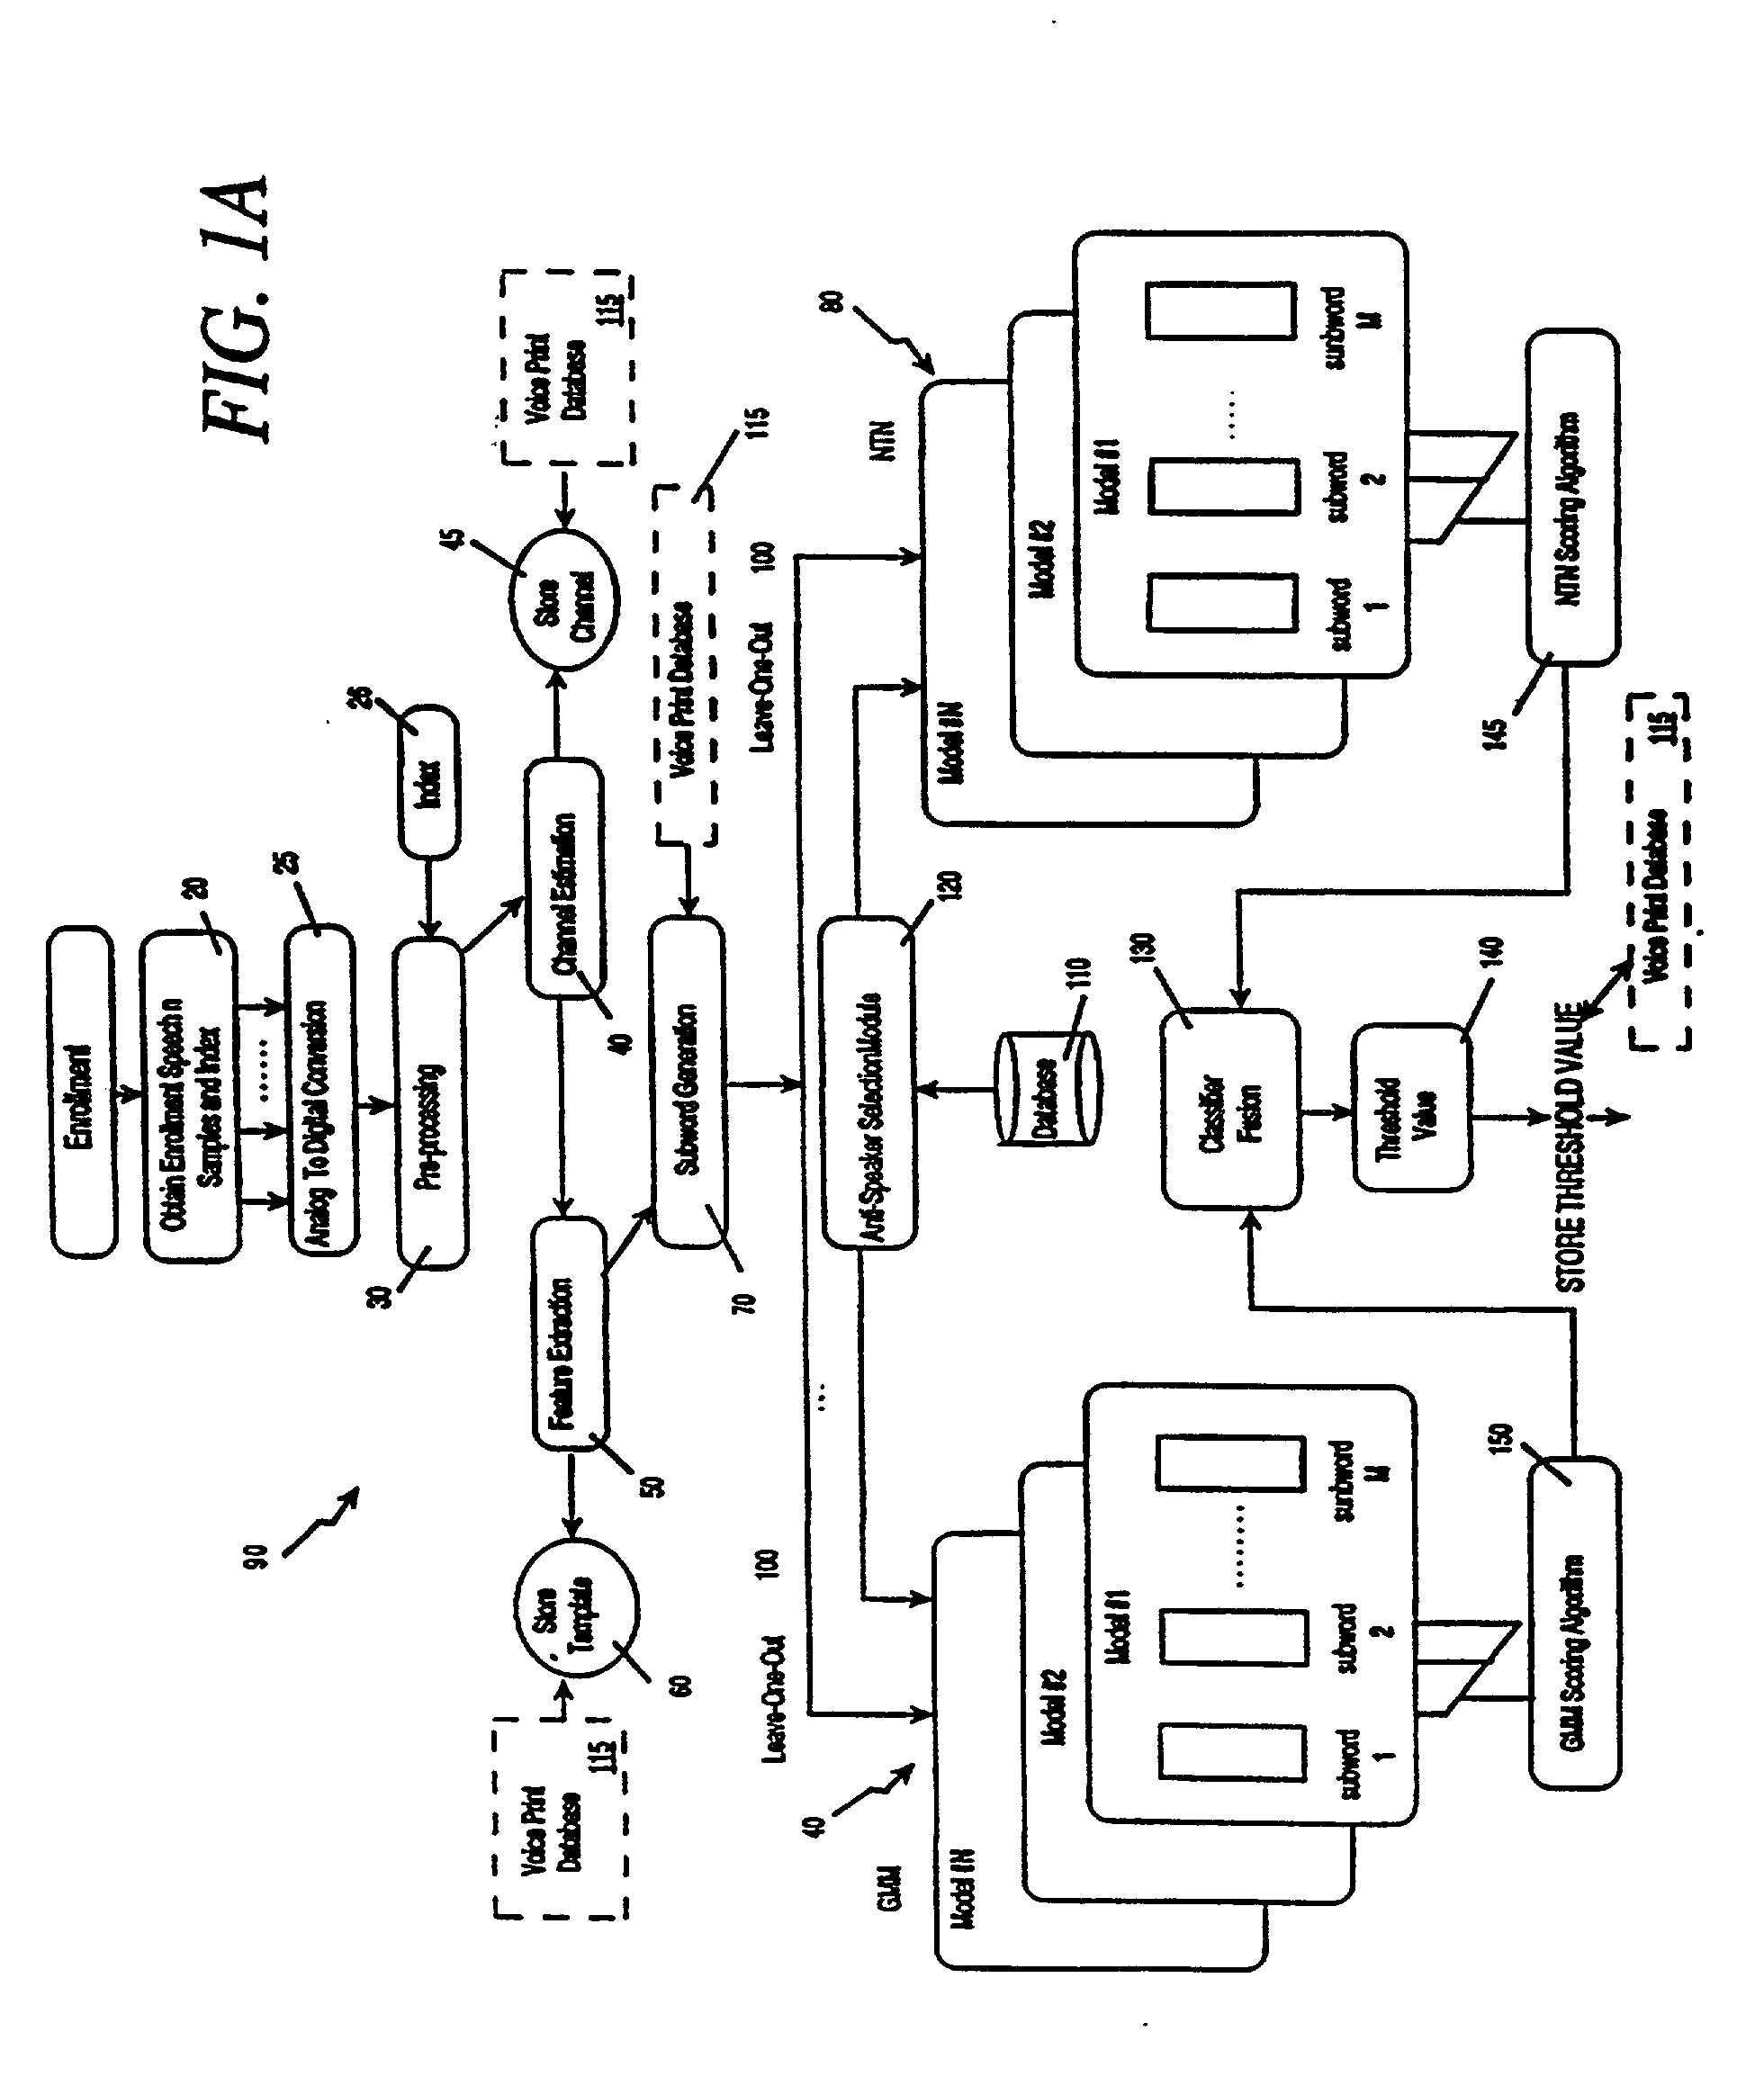 Voice print system and method